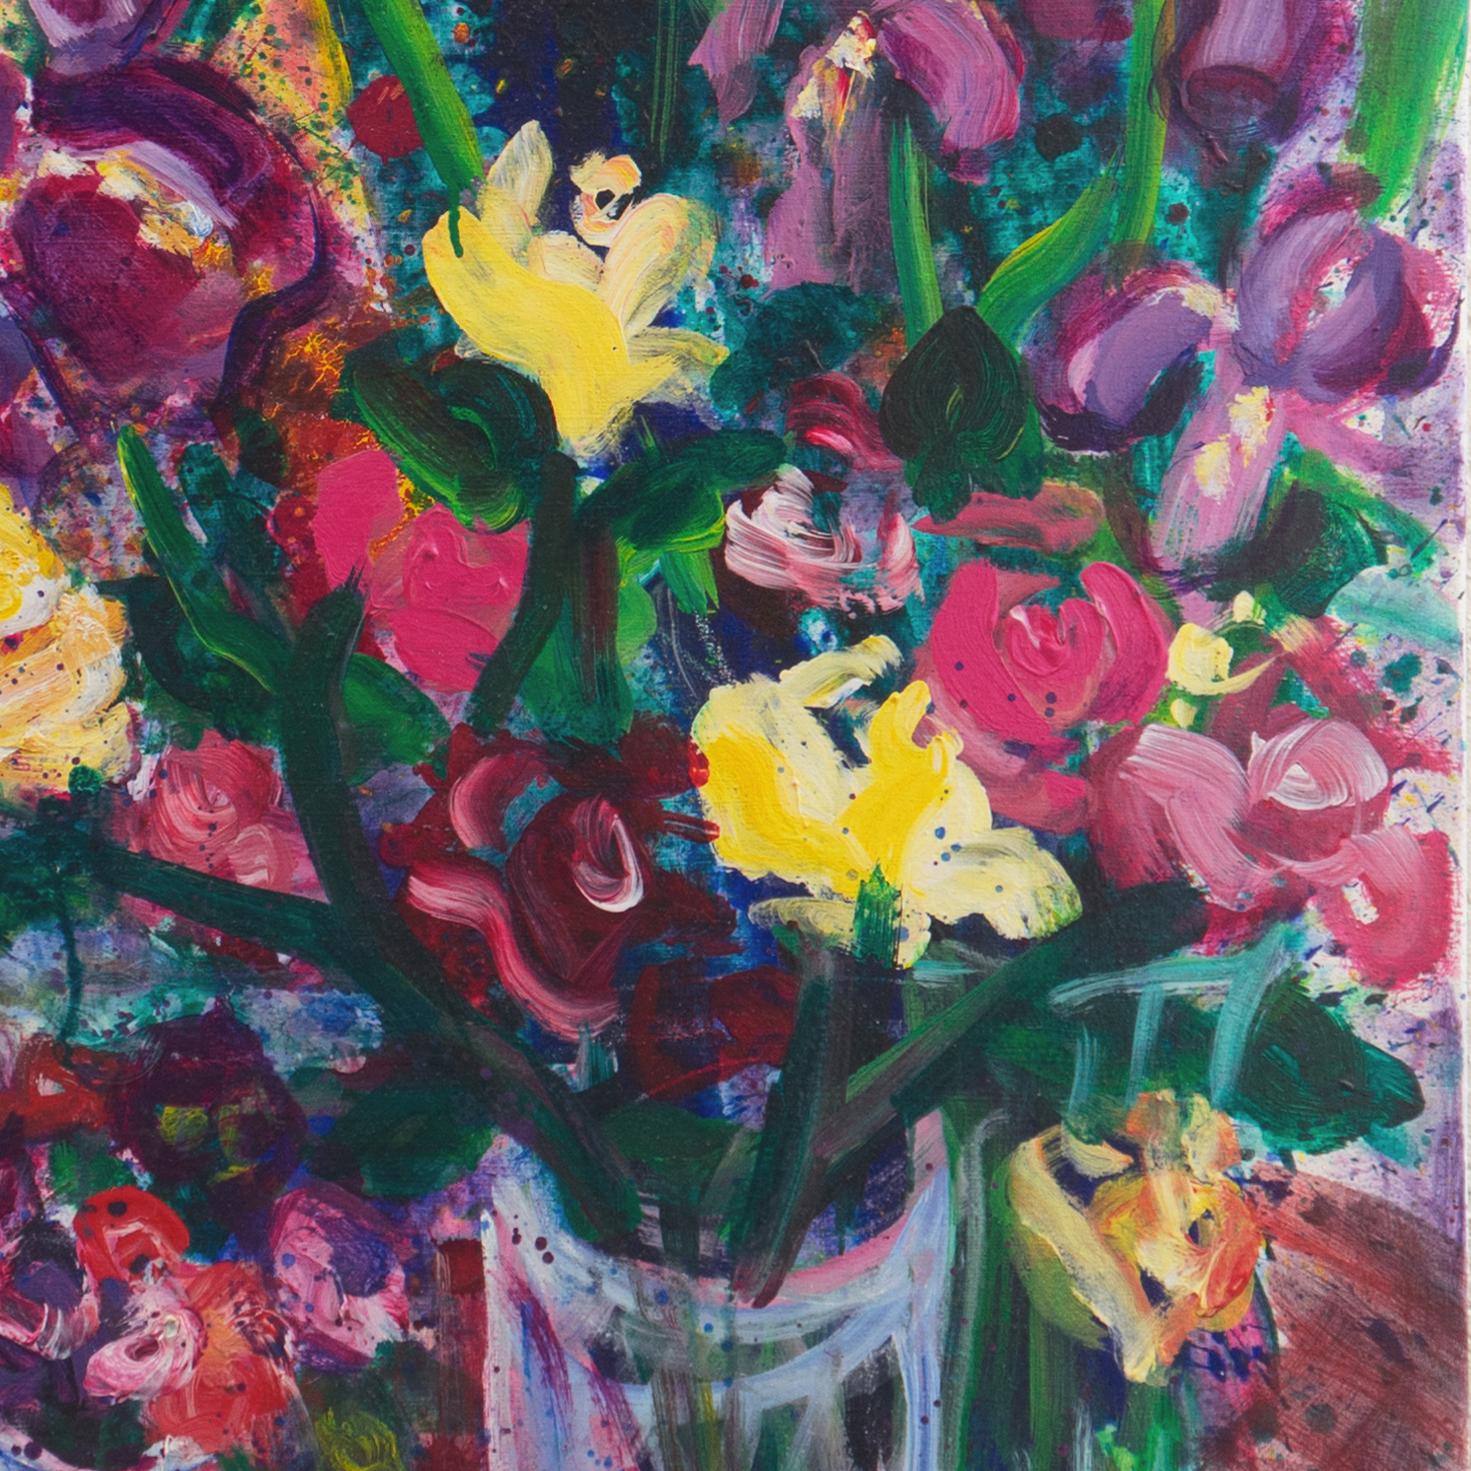 Signed lower right, 'Rochelle' for Rochelle Tietze (American, born 1952); additionally signed, verso, 'Rochelle Tietze', dated '1994' and titled, 'Spring Bouquet II'.

A large and vibrant still-life showing a bouquet of Irises and other spring